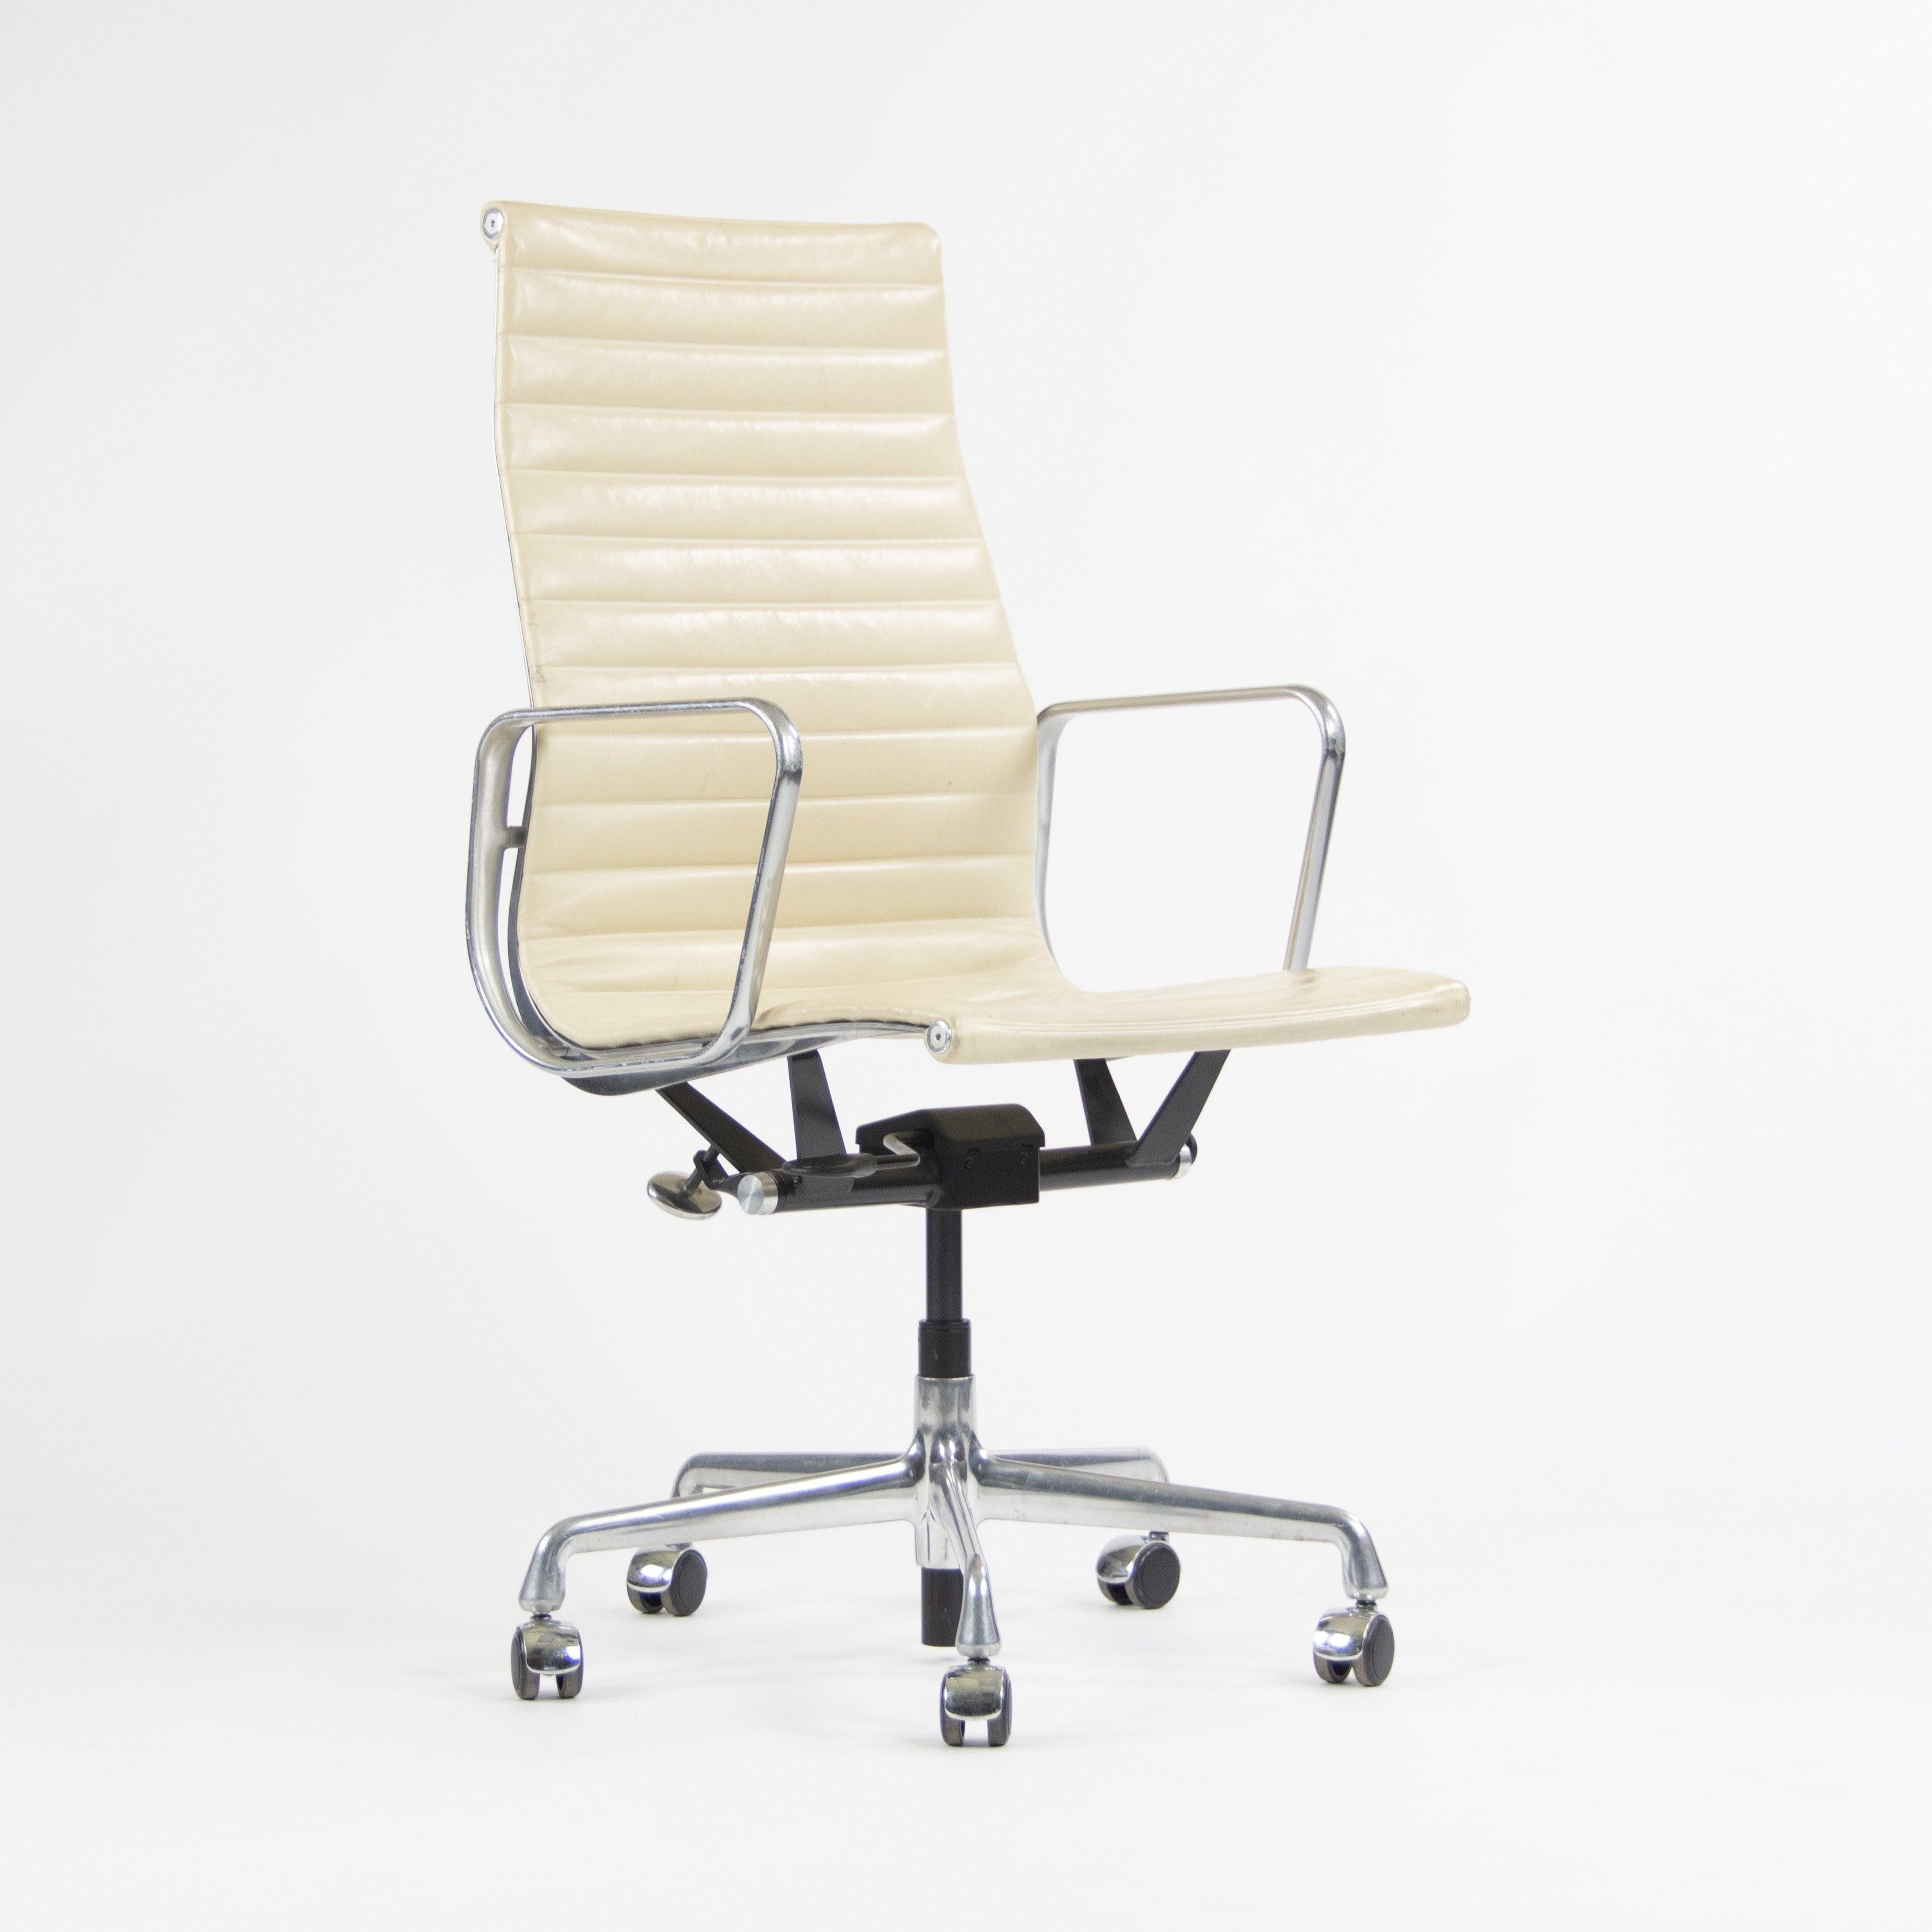 Modern Herman Miller Eames 2011 Executive Aluminum Group Desk Chair 3x Available Ivory For Sale